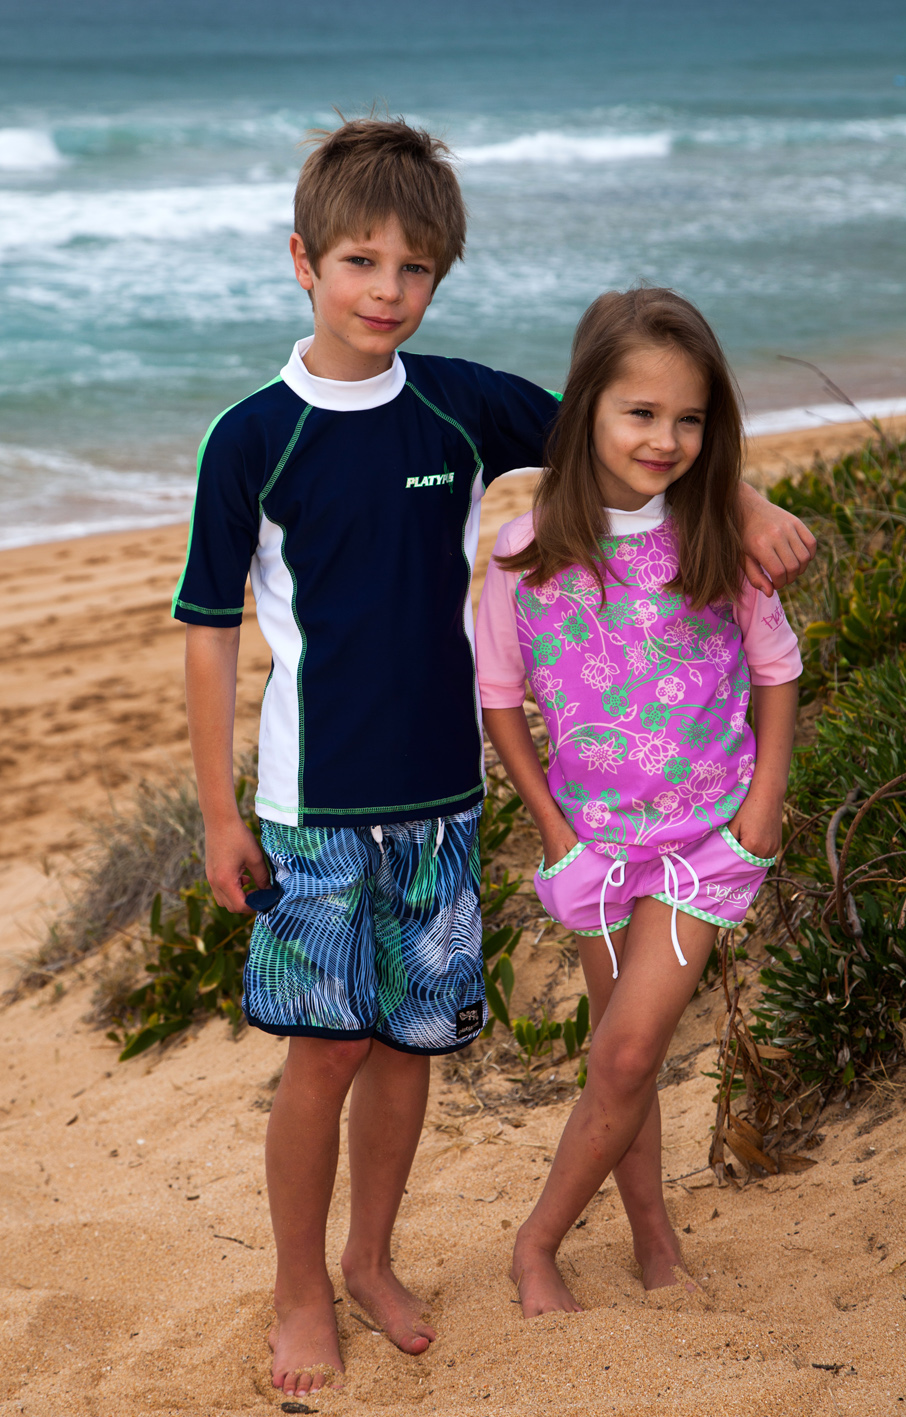 UV Protective Children’s Swimwear Is A Must For Parents To Help Reduce ...